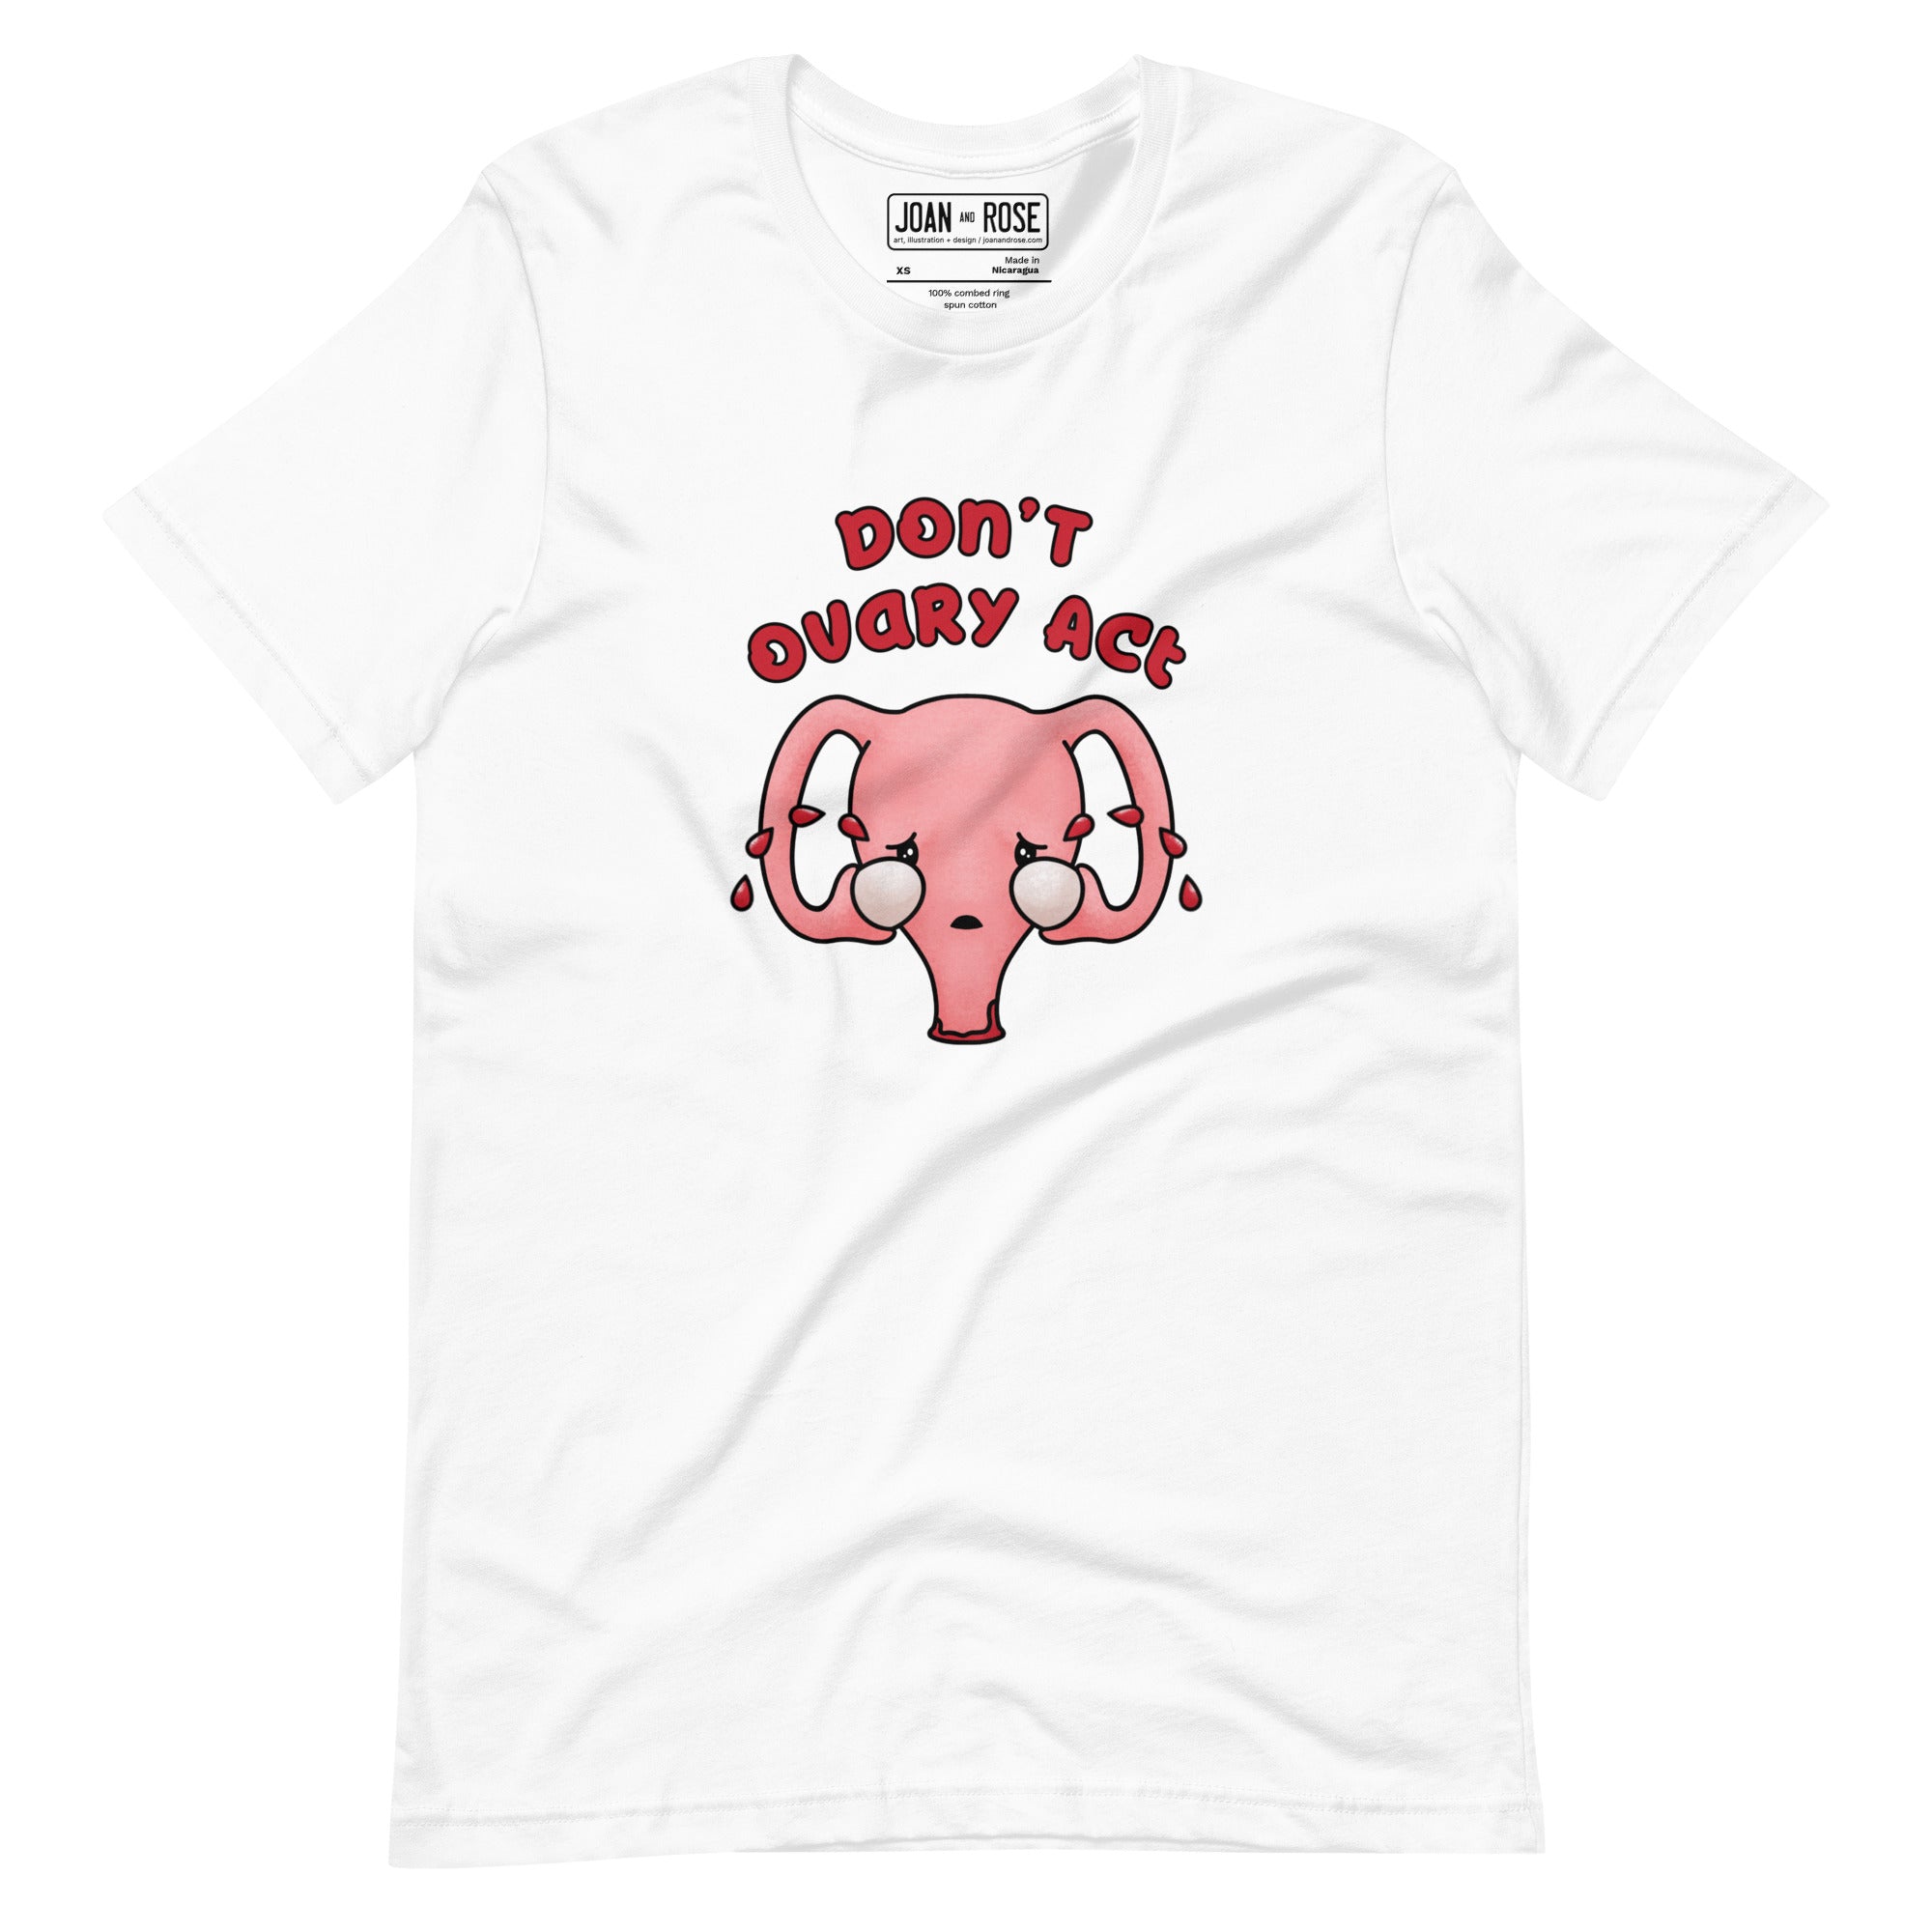 White version of Don't Ovary Act t-shirt